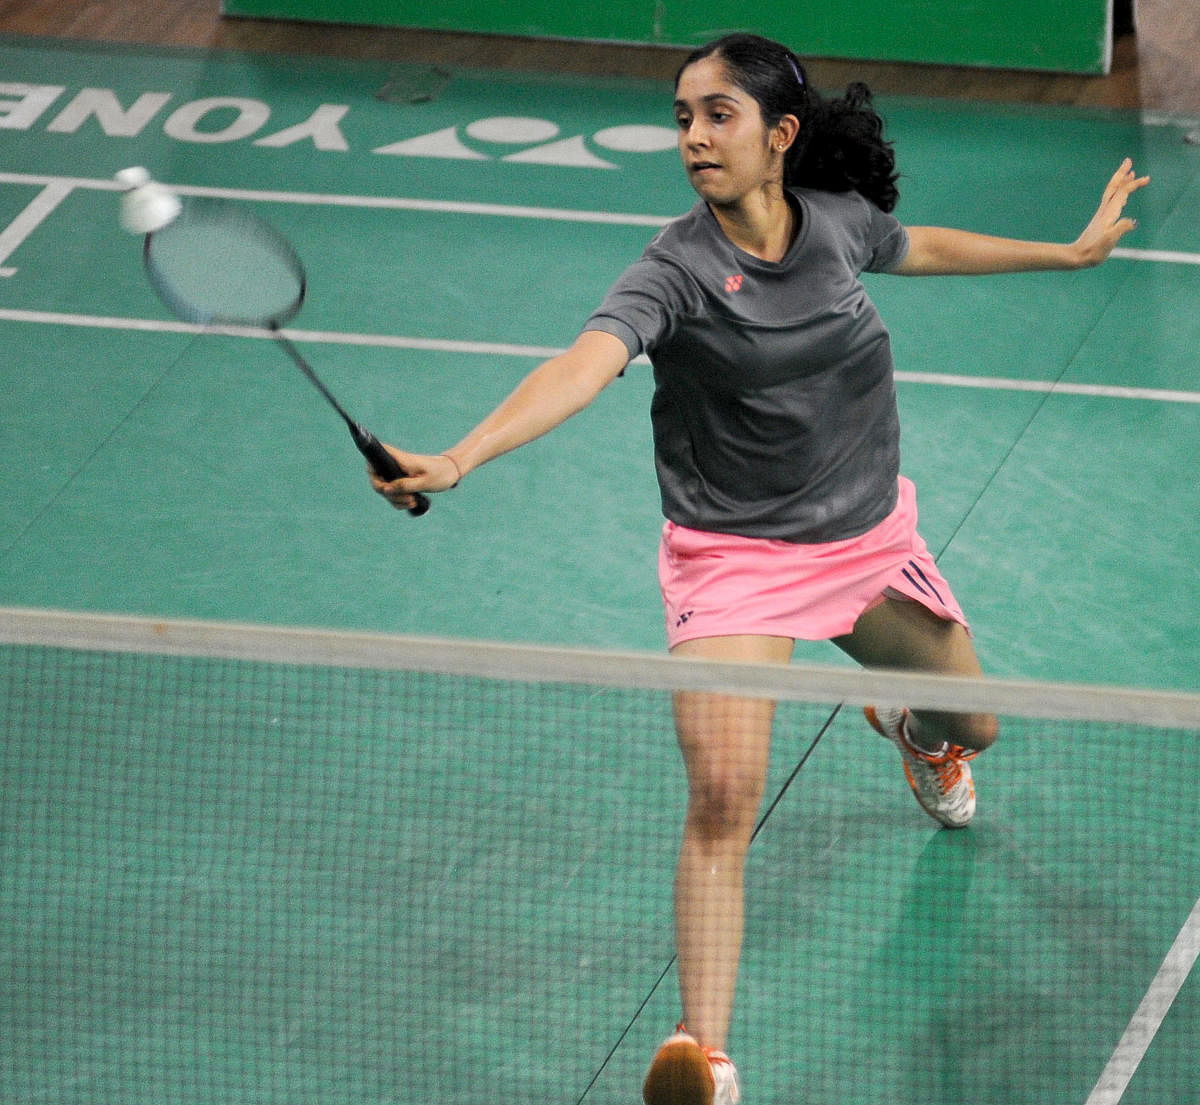 PROMISING PROSPECT: Born to Vasanth Bharadwaj, a former national table tennis champion, and Anuradha Bharadwaj, a former state TT champion, Kriti Bharadwaj has been excelling in badminton. DH PHOTO/ PUSHKAR V